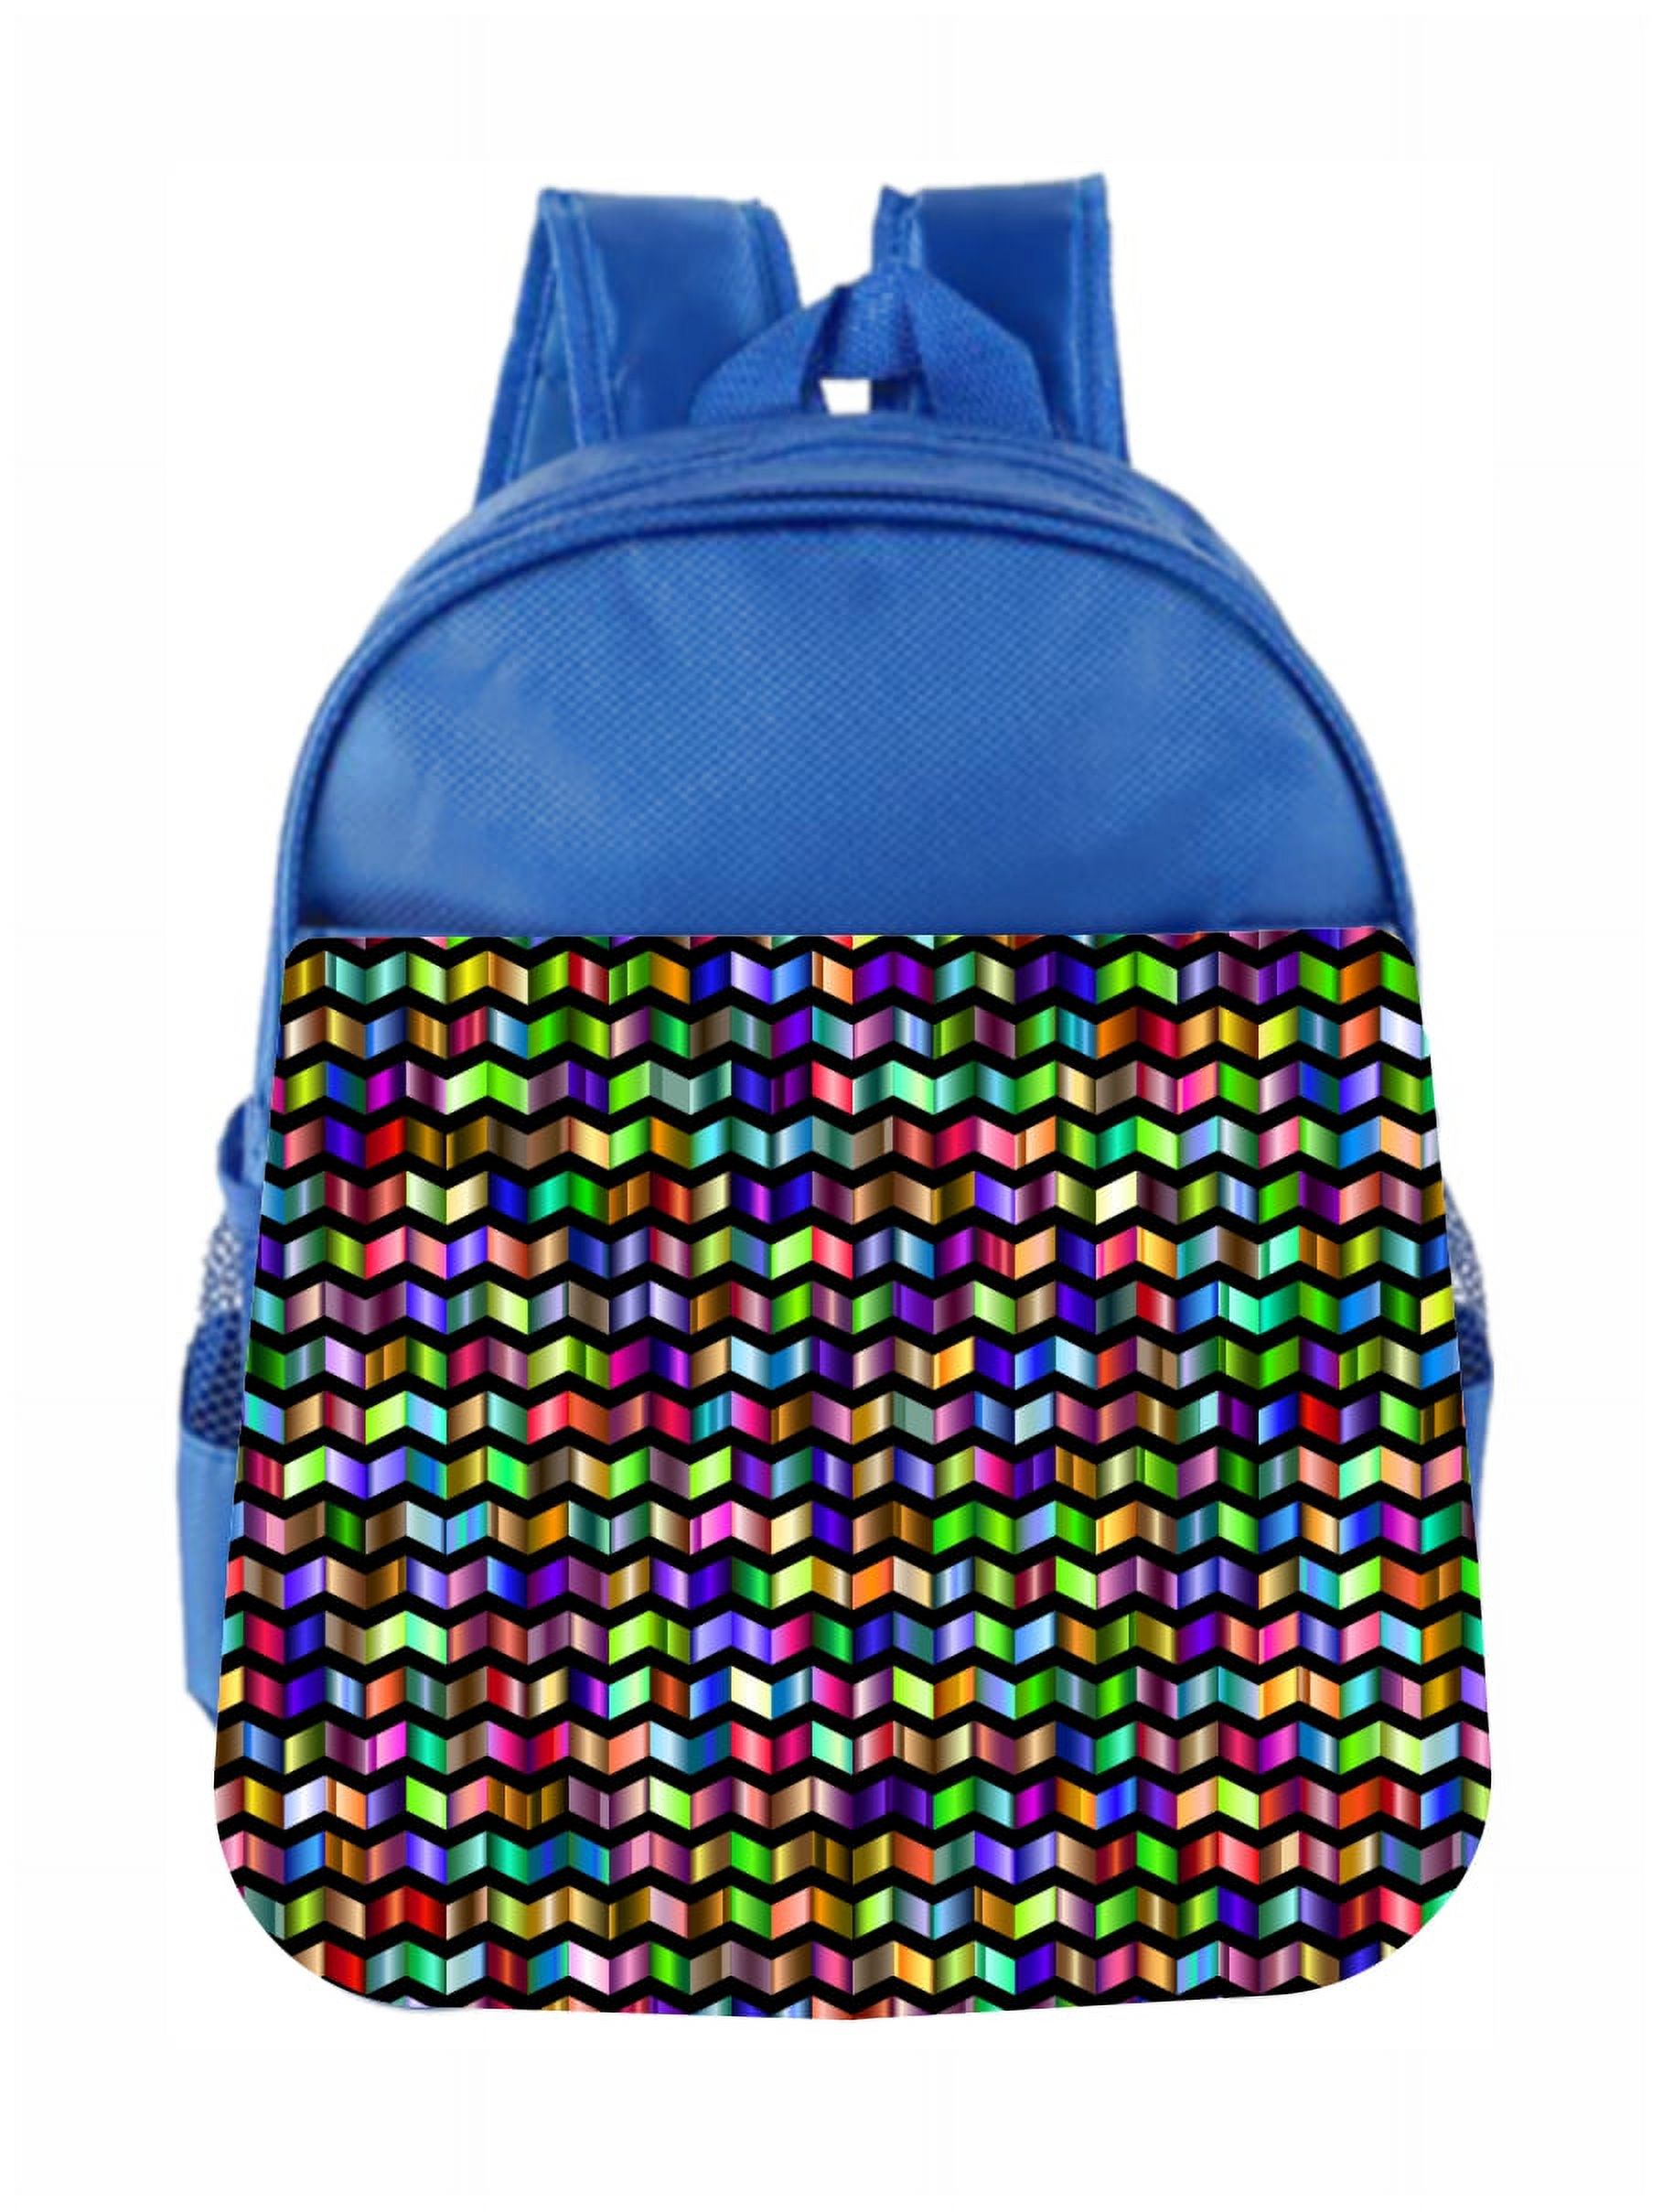 Toddler Backpack Rainbow Geometric Kids Backpack Toddler - image 1 of 4